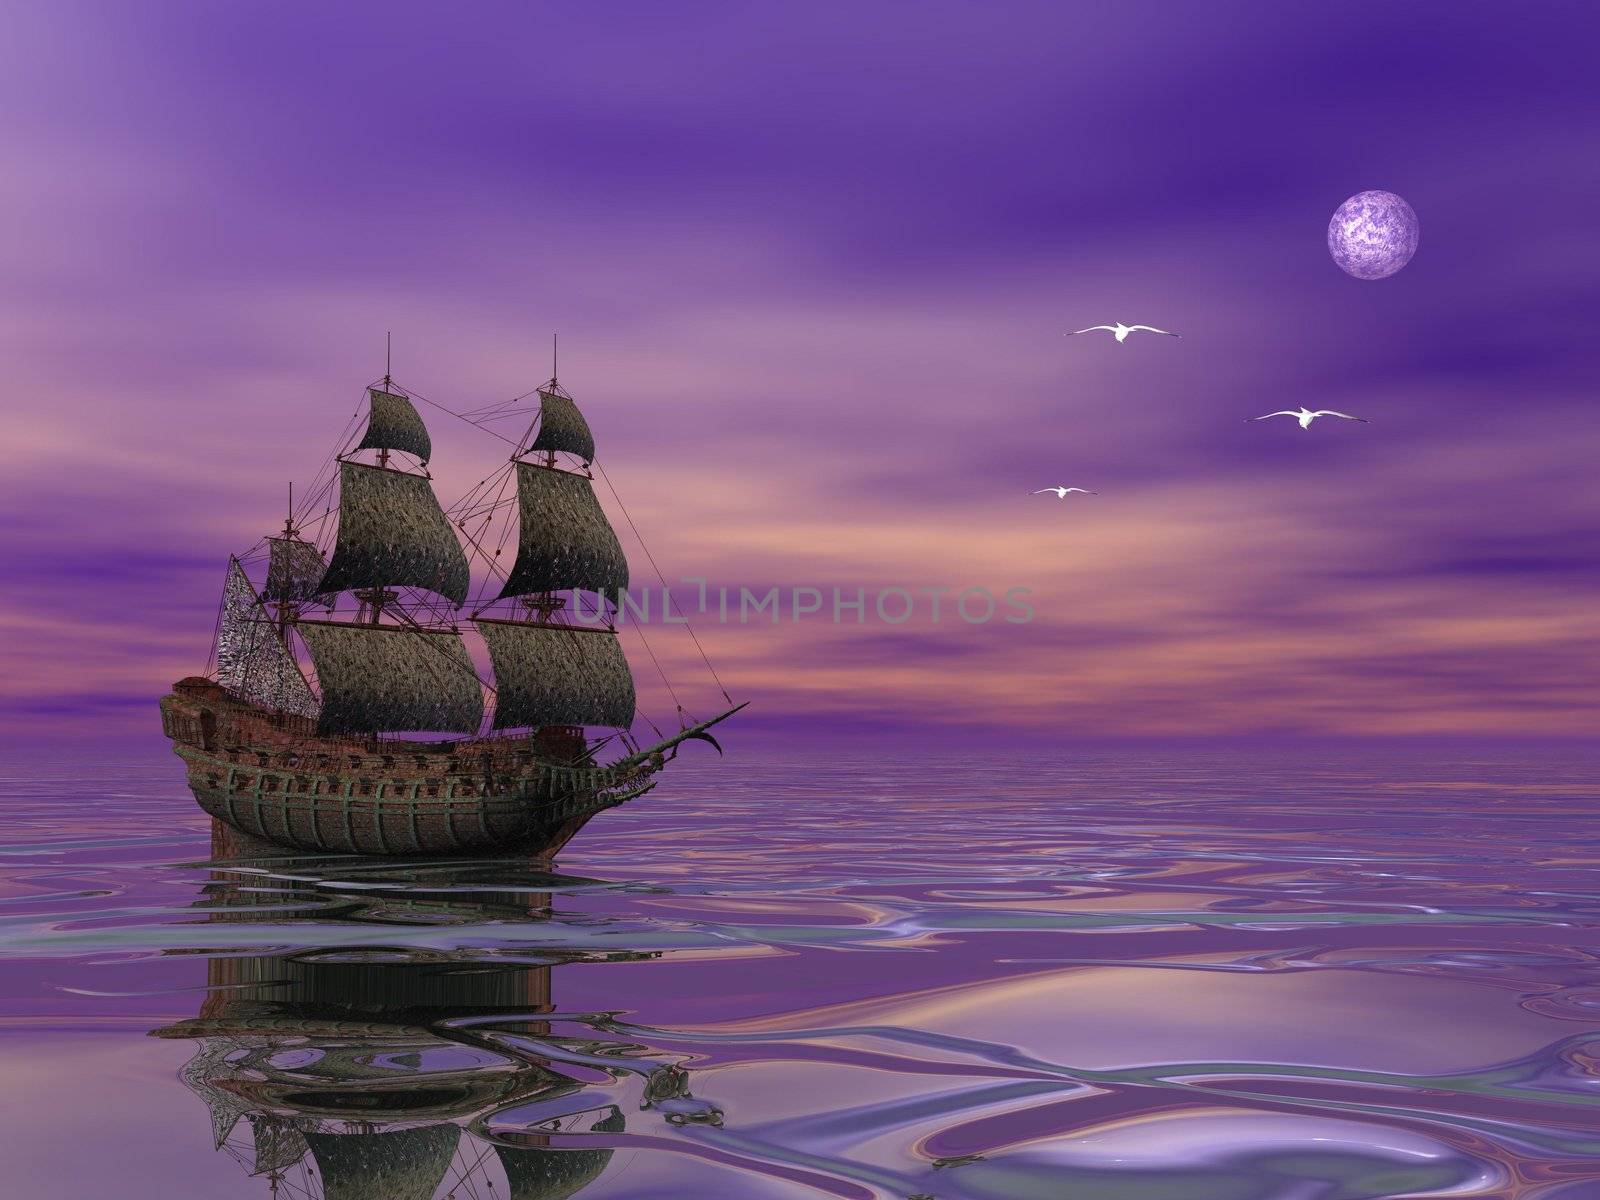 Flying Dutchman, pirate ship sailing in the moonlight by Elenaphotos21